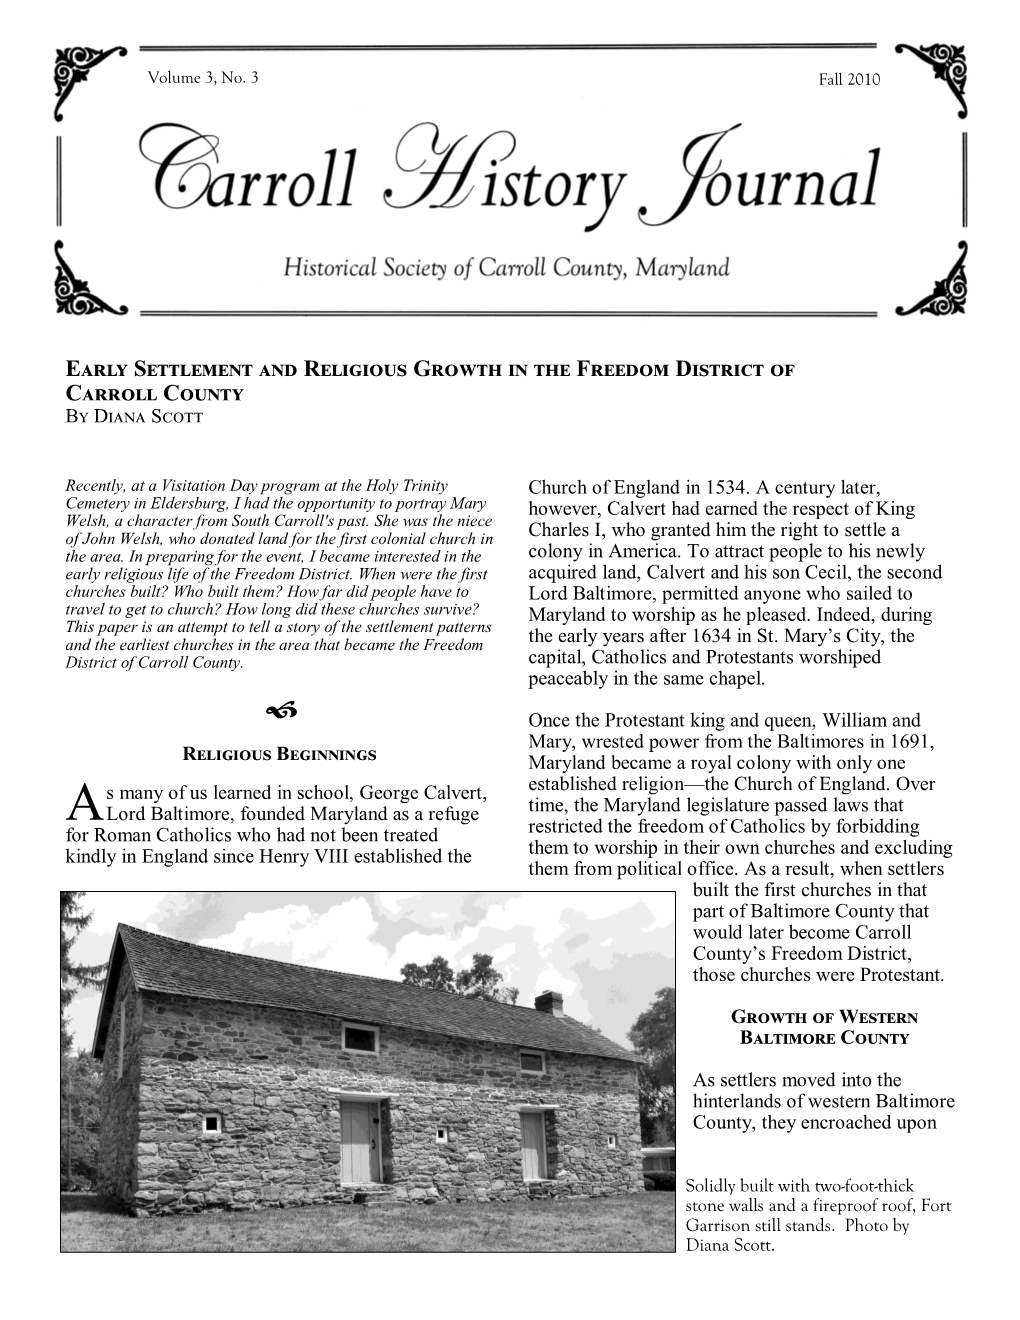 Early Settlement and Religious Growth in the Freedom District of Carroll County by Diana Scott